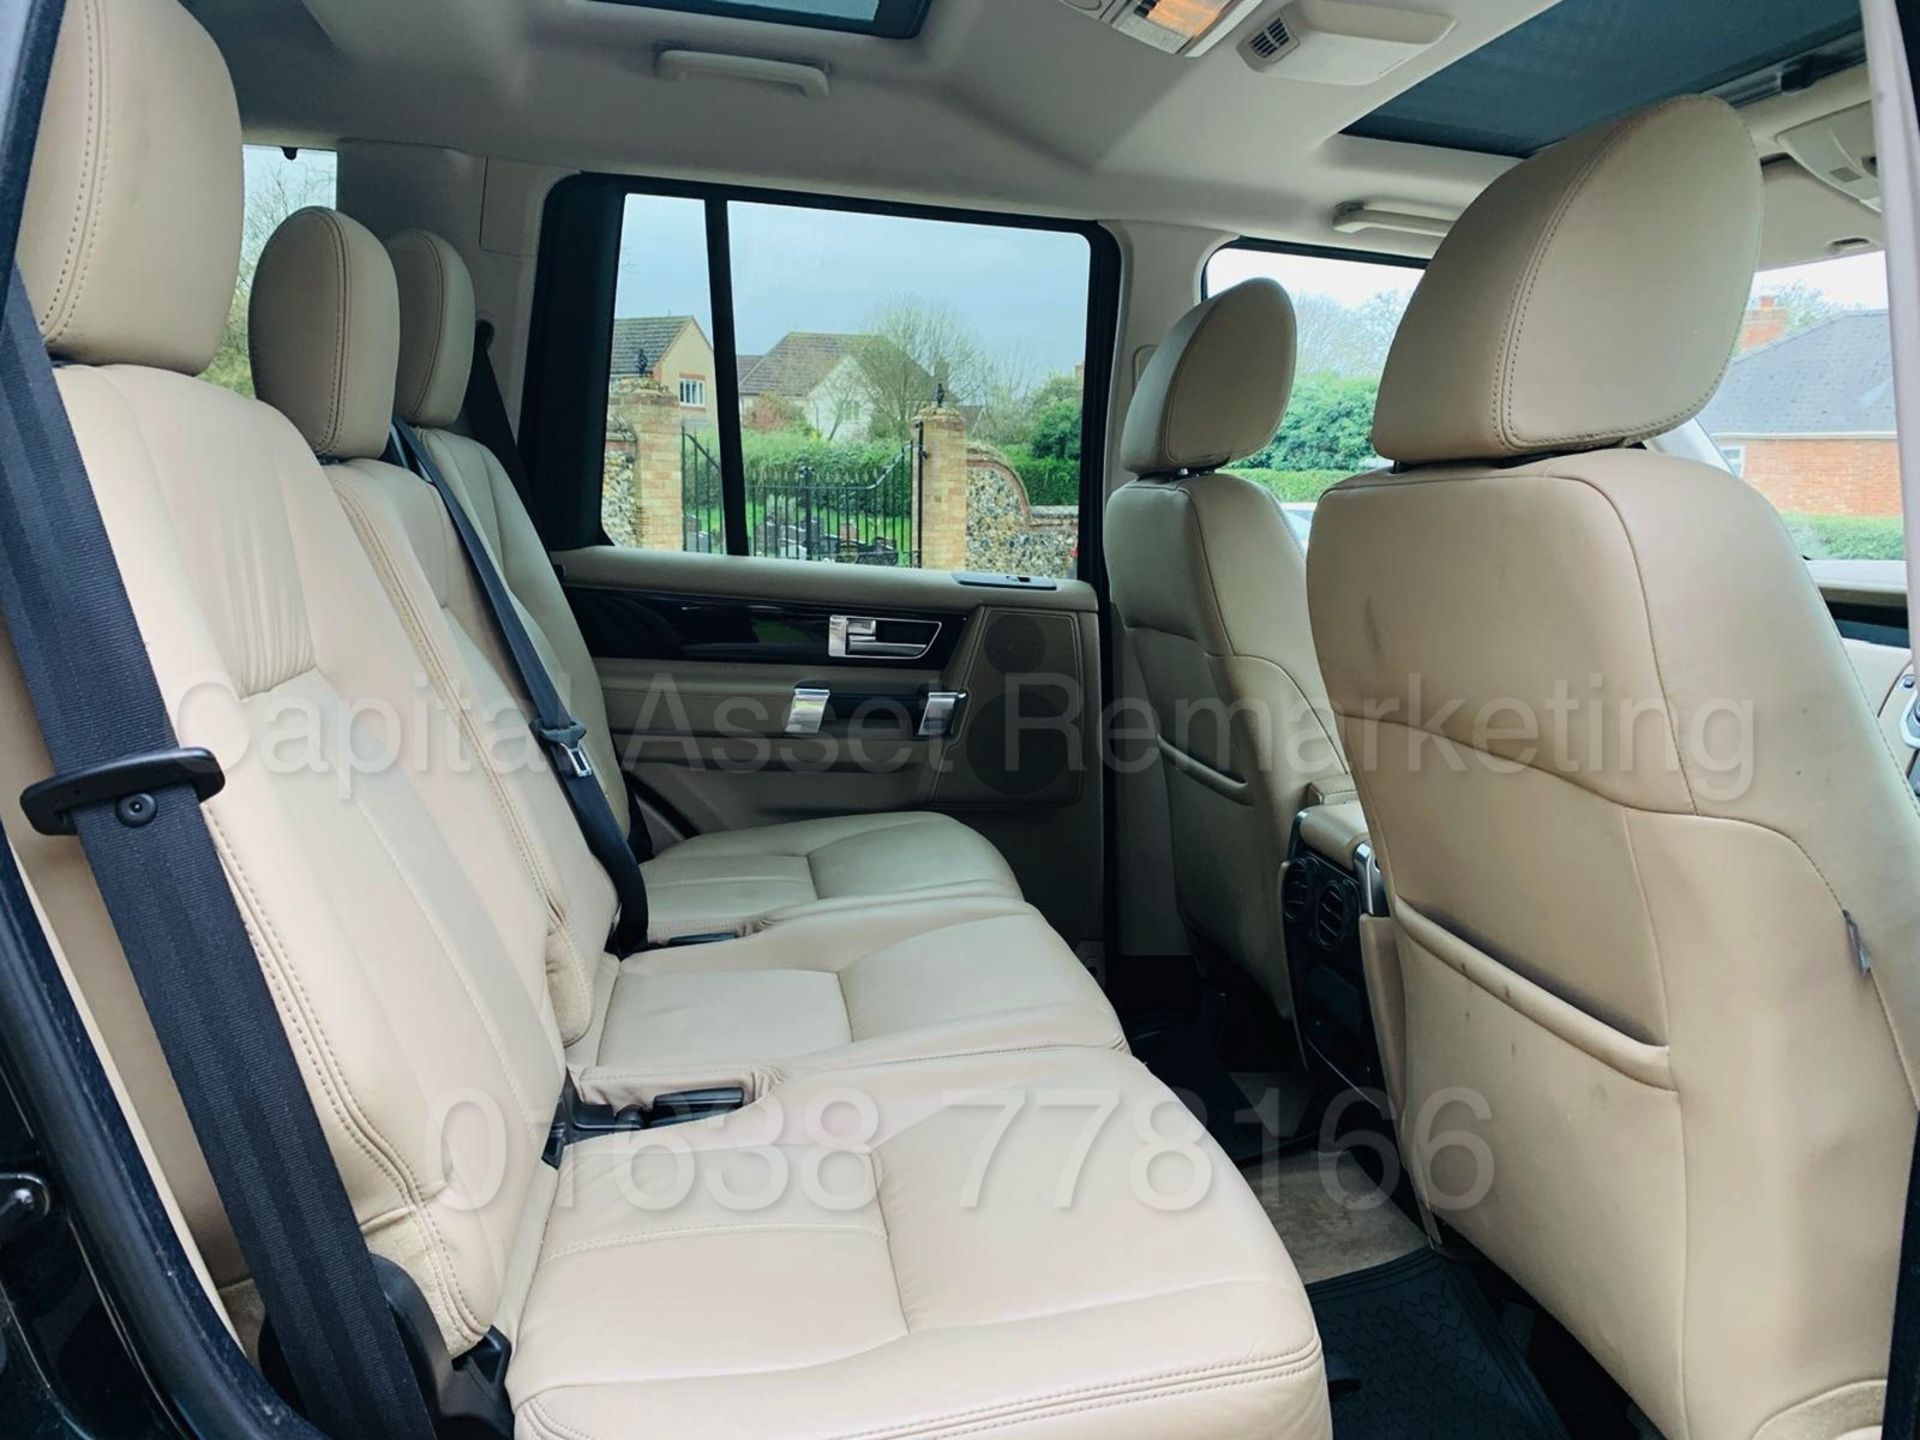 LAND ROVER DISCOVERY *HSE EDITION* 7 SEATER SUV (2012 MODEL) '3.0 SDV6- 8 SPEED AUTO' **HUGE SPEC** - Image 34 of 48